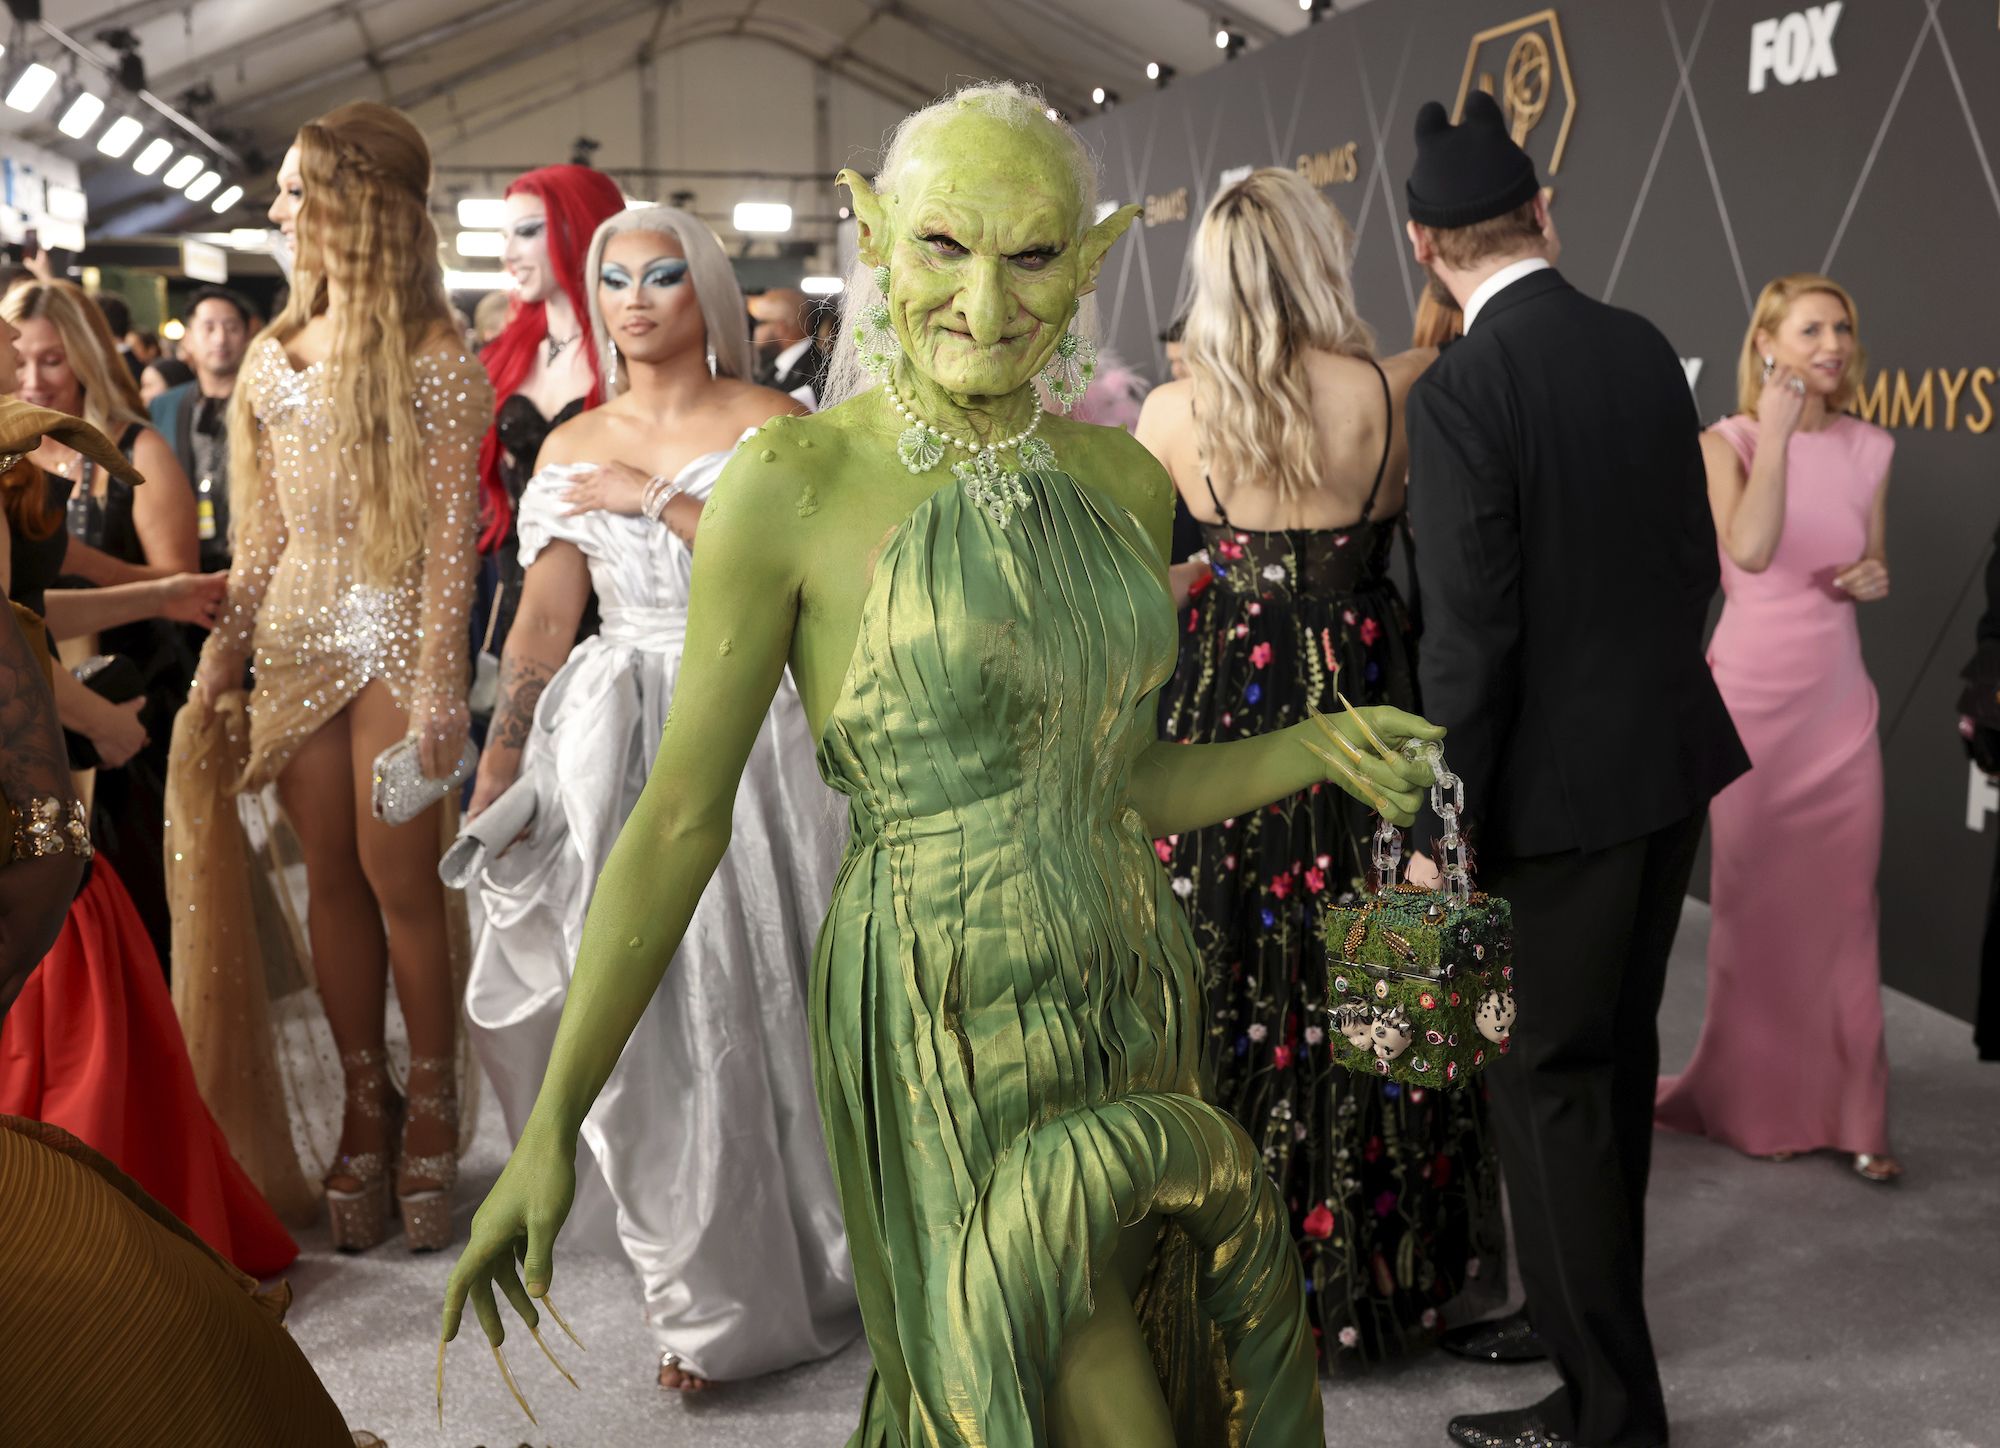 Why Princess Poppy was dressed as a green troll at the Emmy Awards | CNN